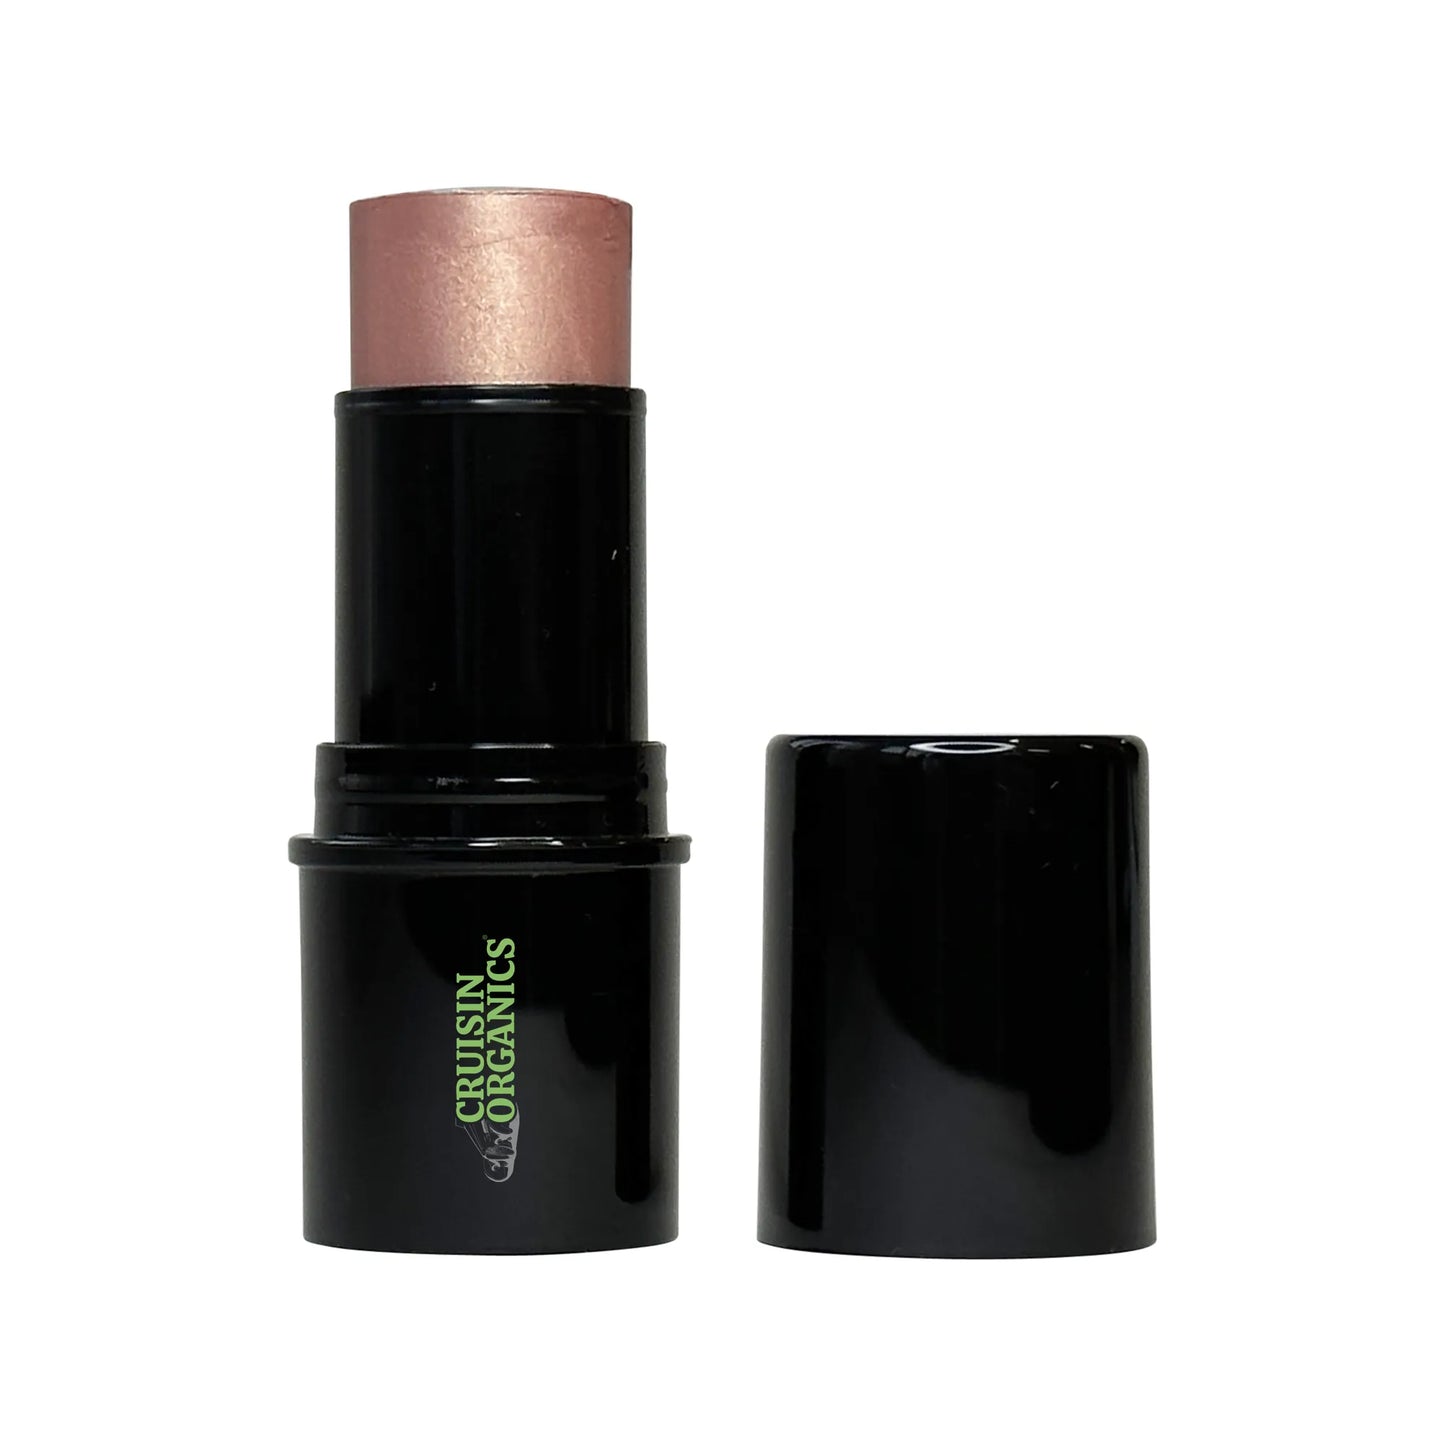 Cruisin Organics glowy highlighter stick with beige lights will be the pick-me-up you need throughout the day. Get a perfect, radiant glow with this easy-to-use, nourishing highlighter stick. Infused with vitamin C, you’ll instantly brighten up your cheeks with shimmer. The highlighter stick also contains vitamins A and E, which promote skin health and soften the skin. Buildable and streak-free, this luminous highlighter stick will bring your best features forward.